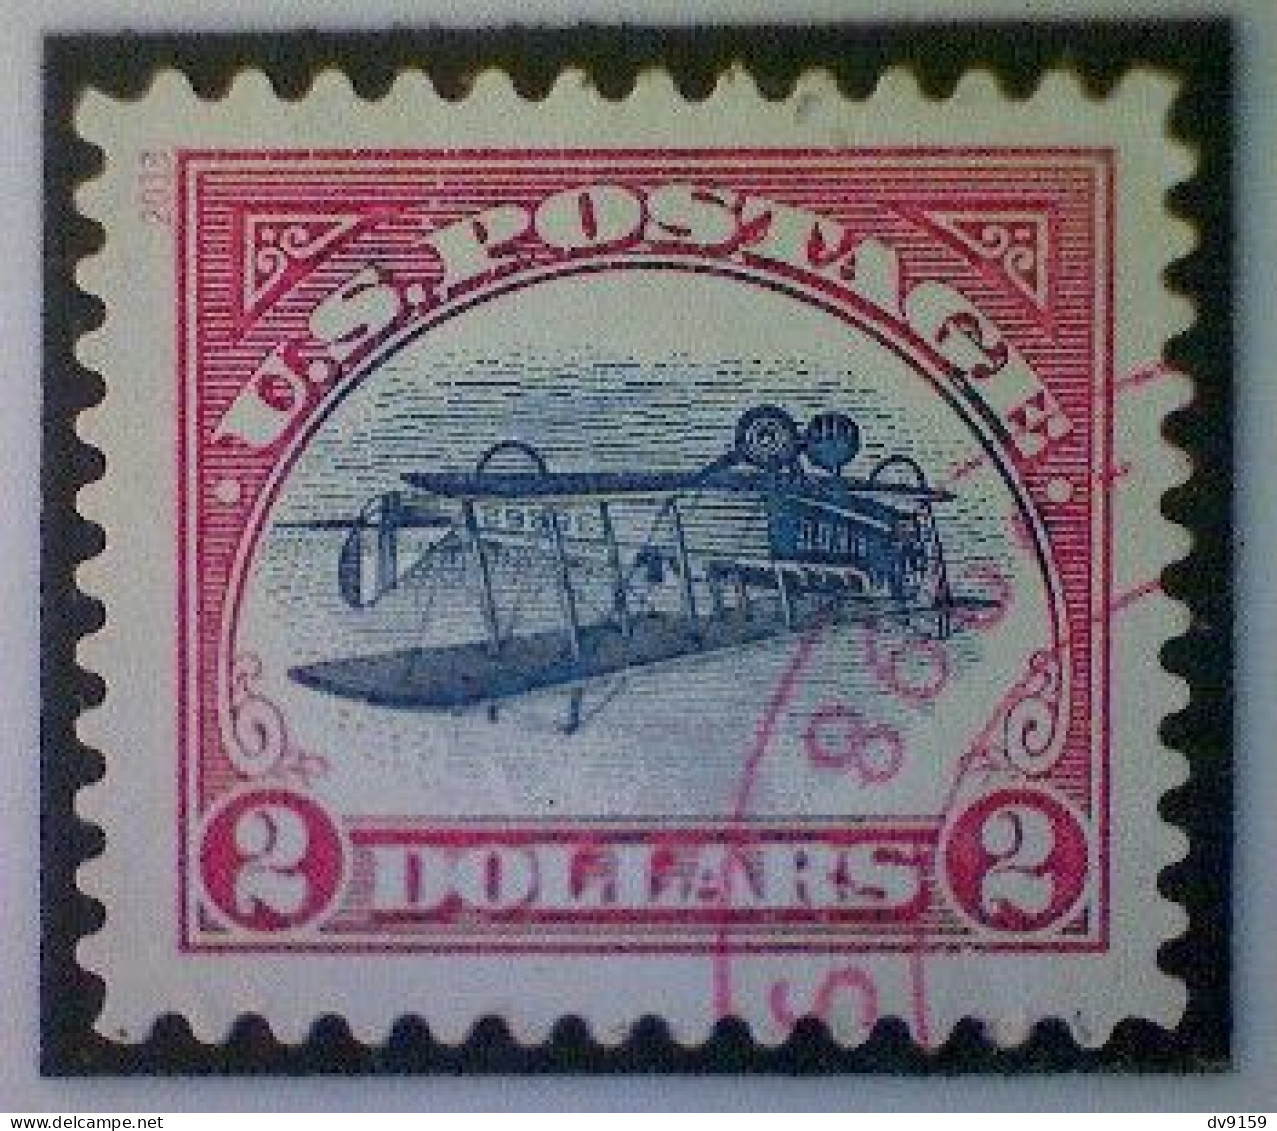 United States, Scott #4806a, Used(o), 2013, Inverted Jenny, Single, $2, Blue, Black, And Red - Gebruikt